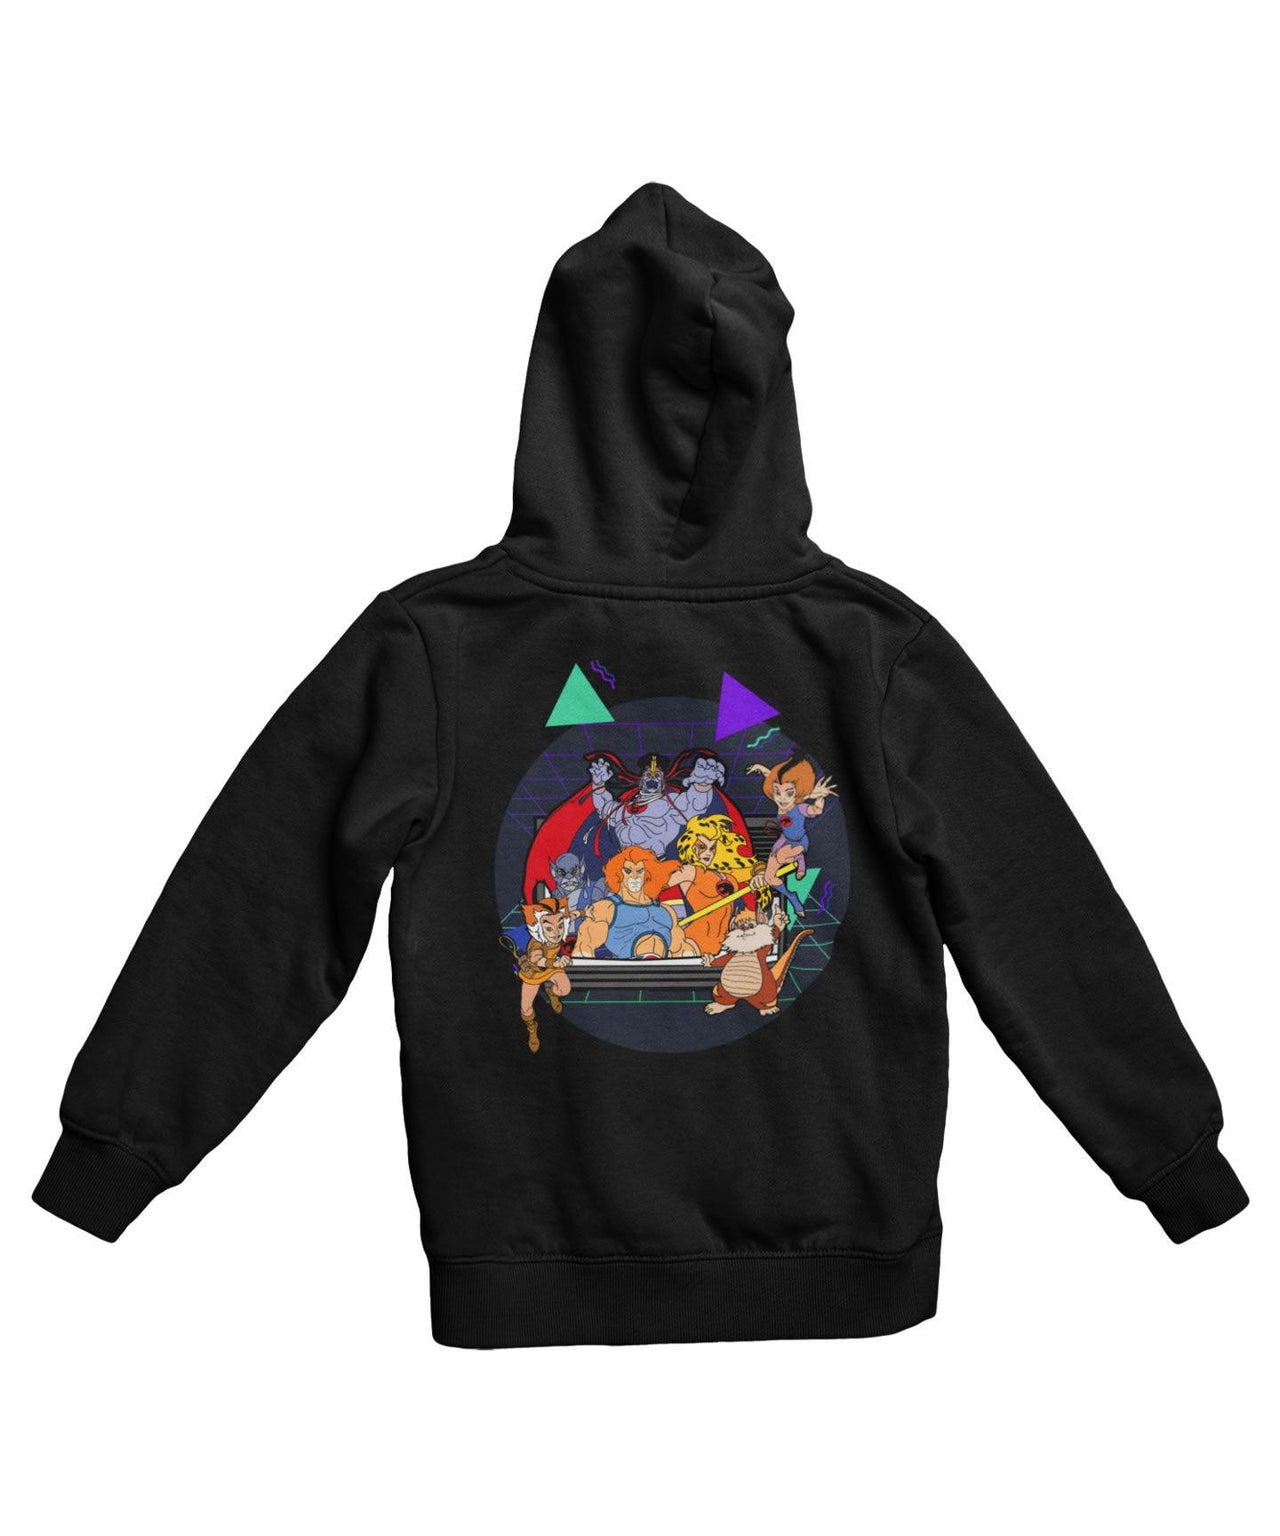 Top Notchy TV Toon Number 4 Back Printed Graphic Hoodie 8Ball